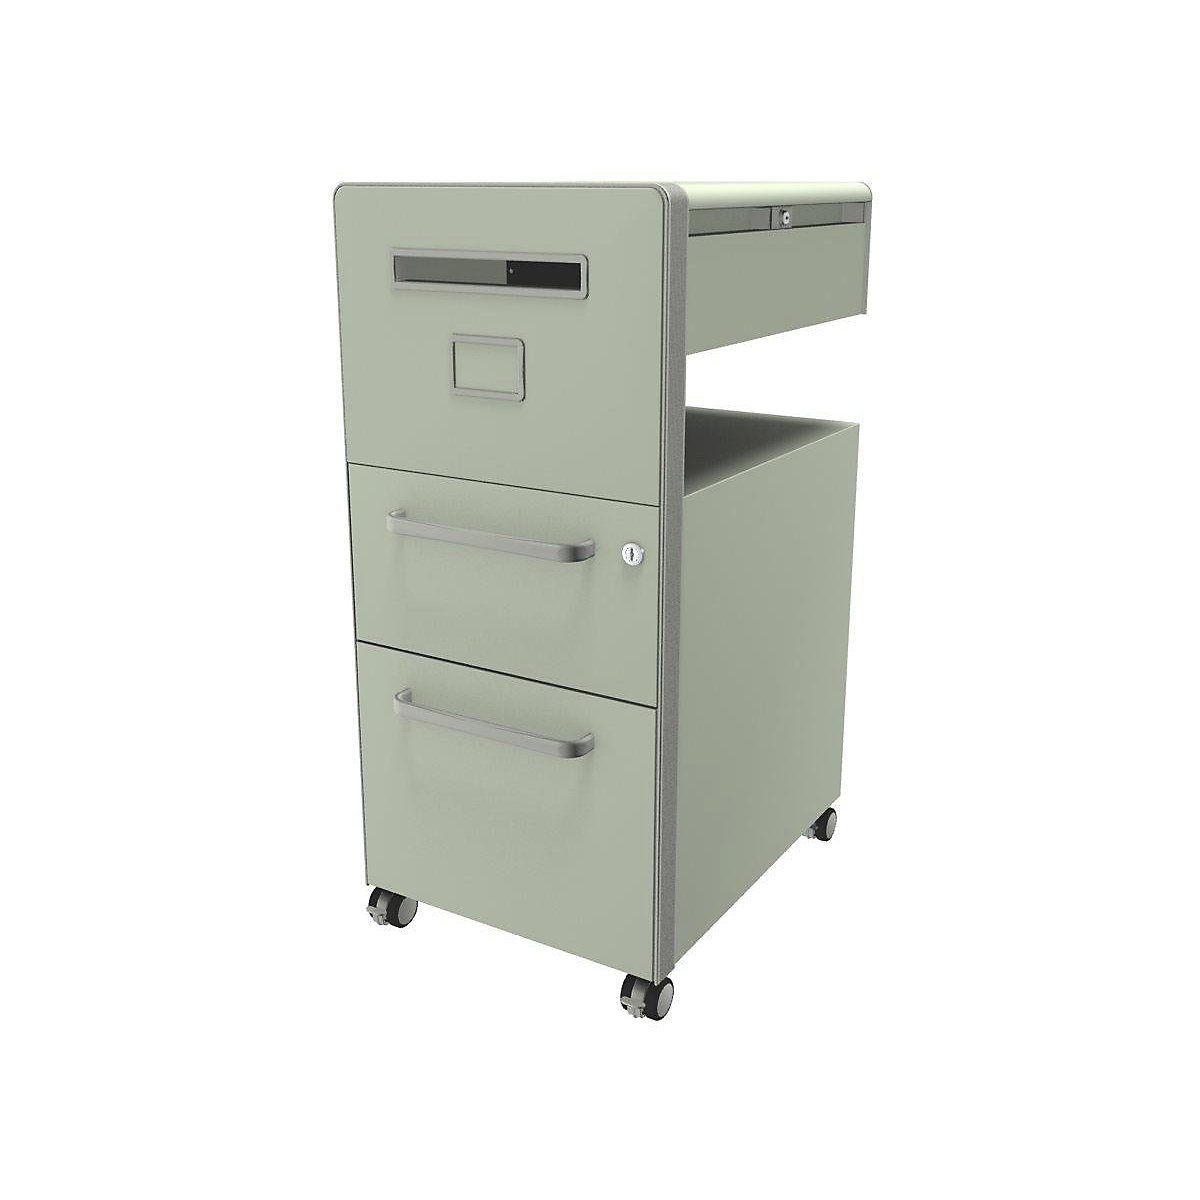 Bite™ pedestal furniture, with 1 pin board, opens on the left side – BISLEY, with 1 universal drawer, 1 suspension file drawer, portland-16